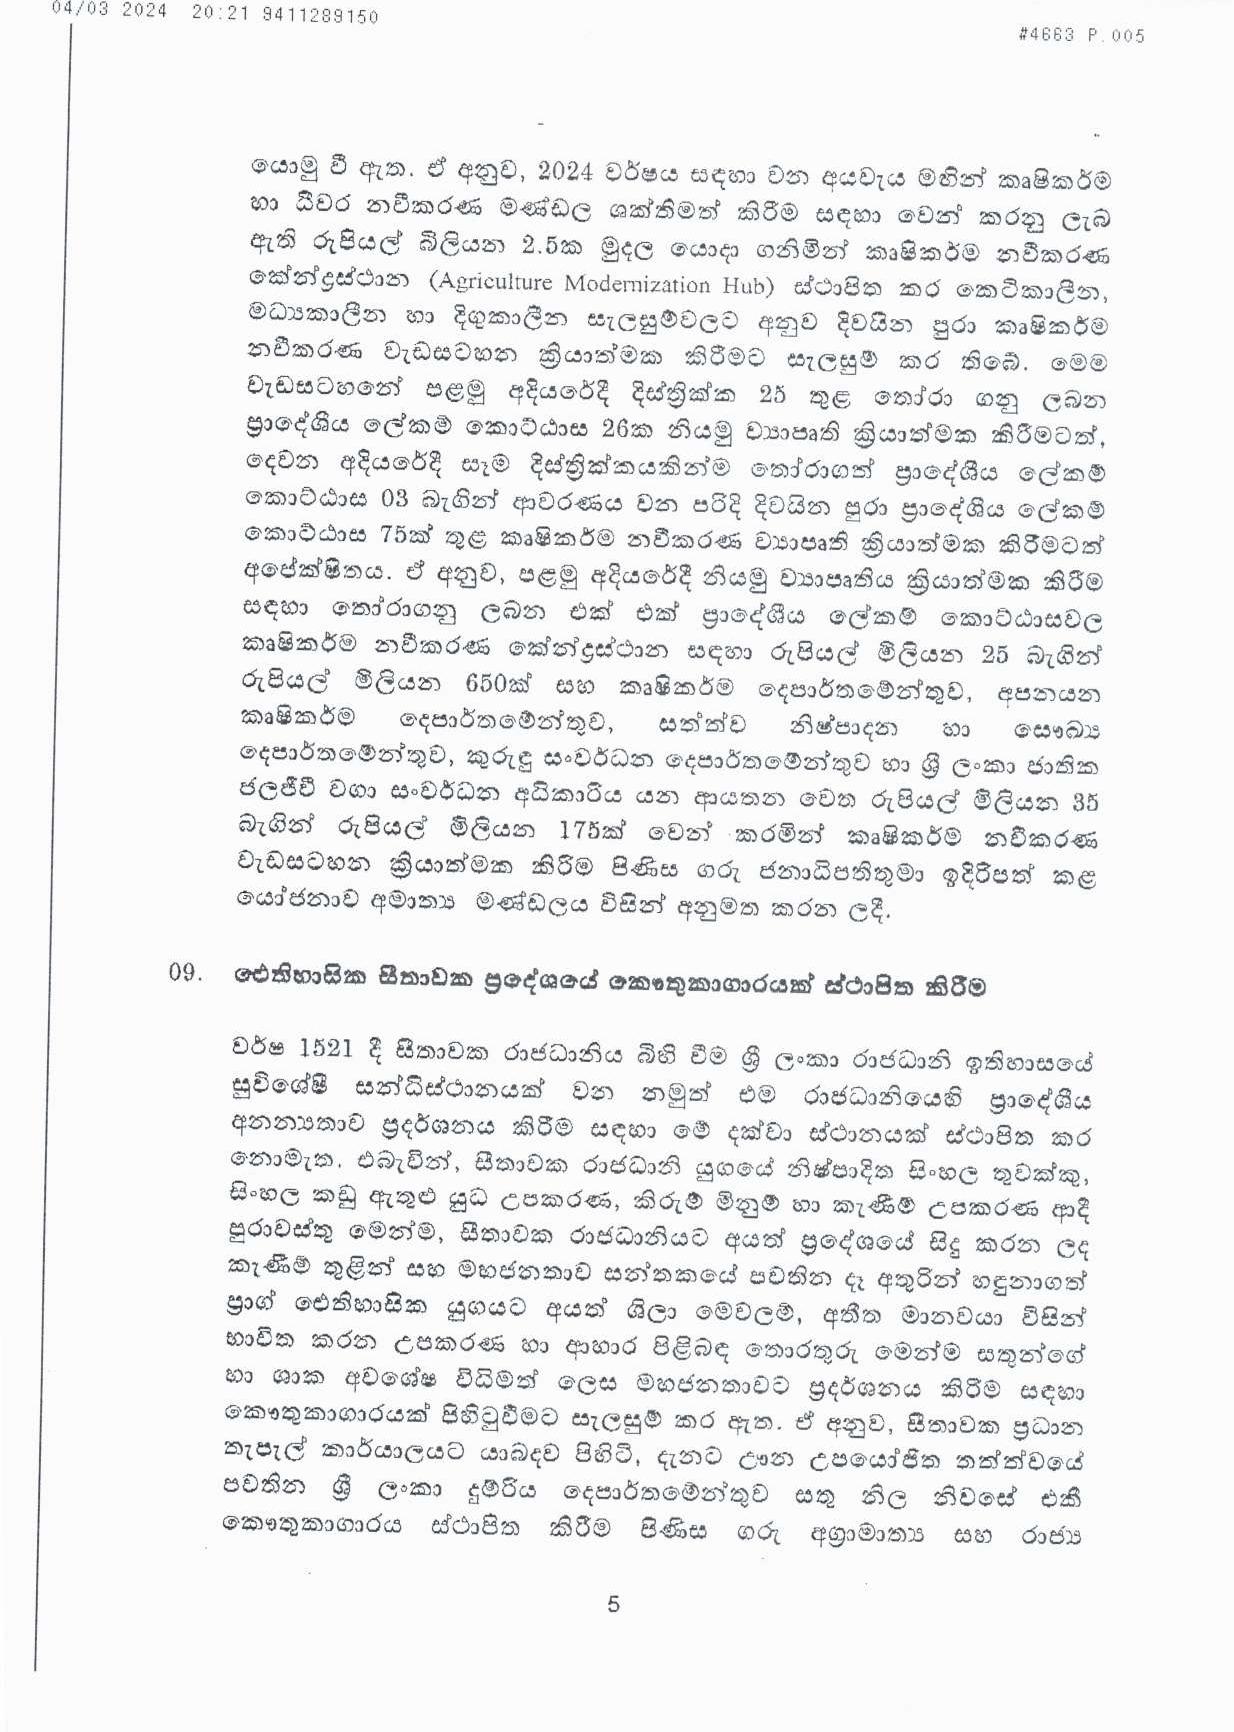 Cabinet Decision on 04.03.2024 page 005